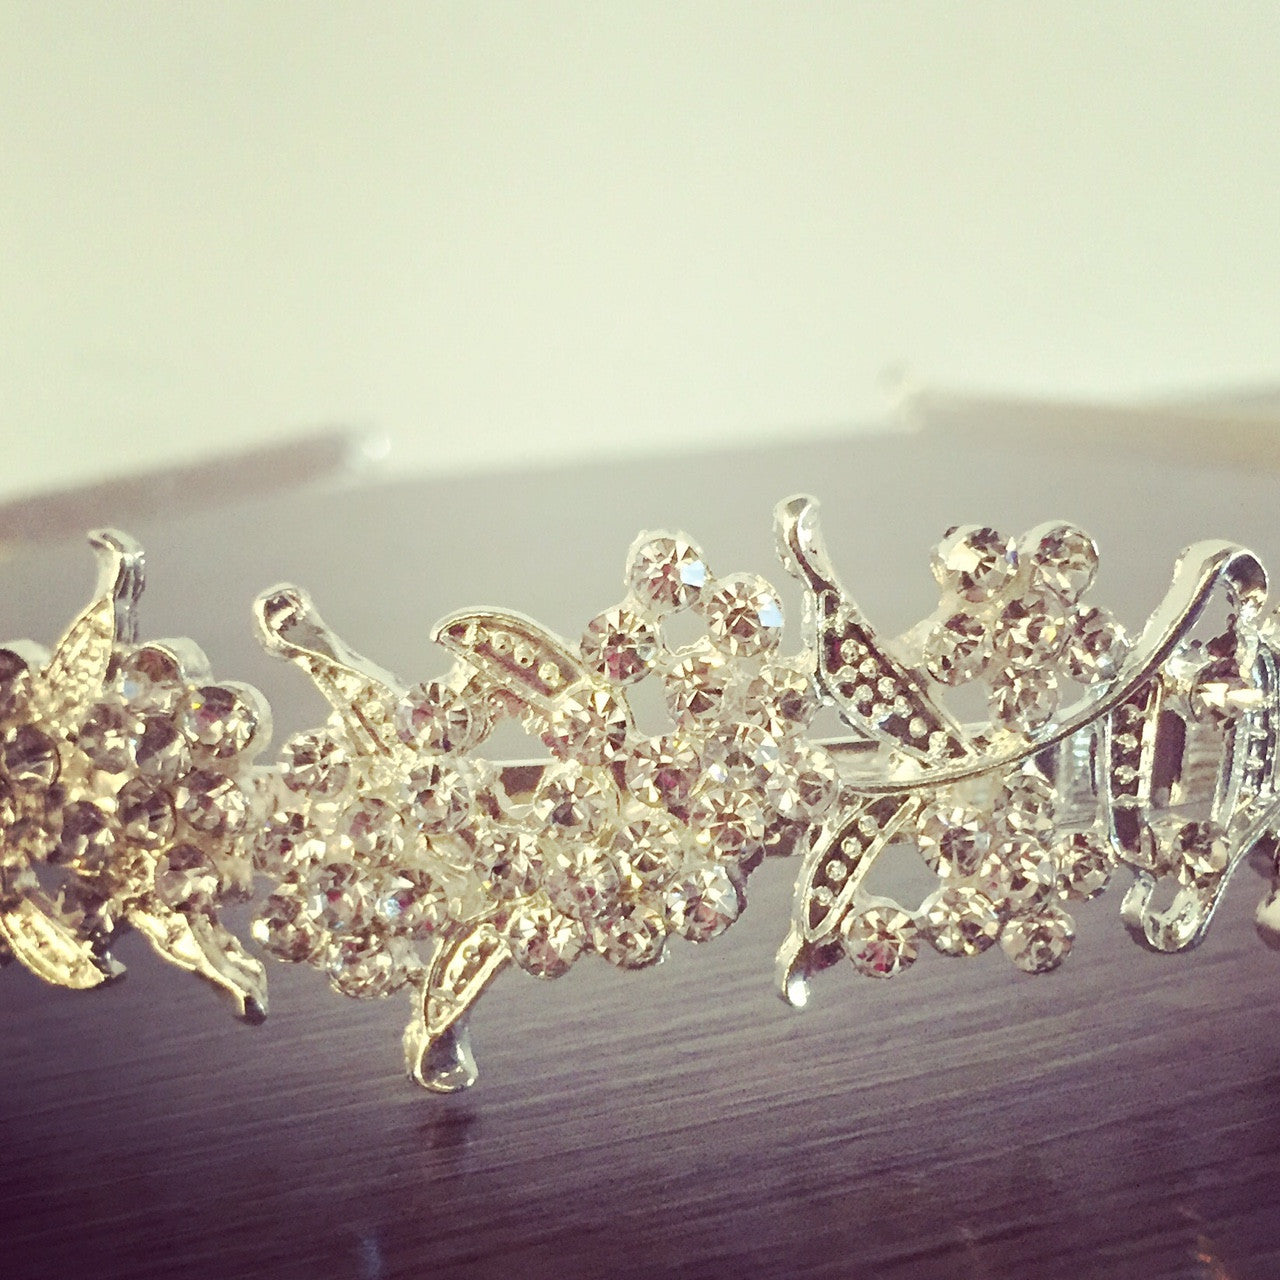 Bride to the Hustle Tiara | Royalty Crown Party or Bridal Hair Accessory